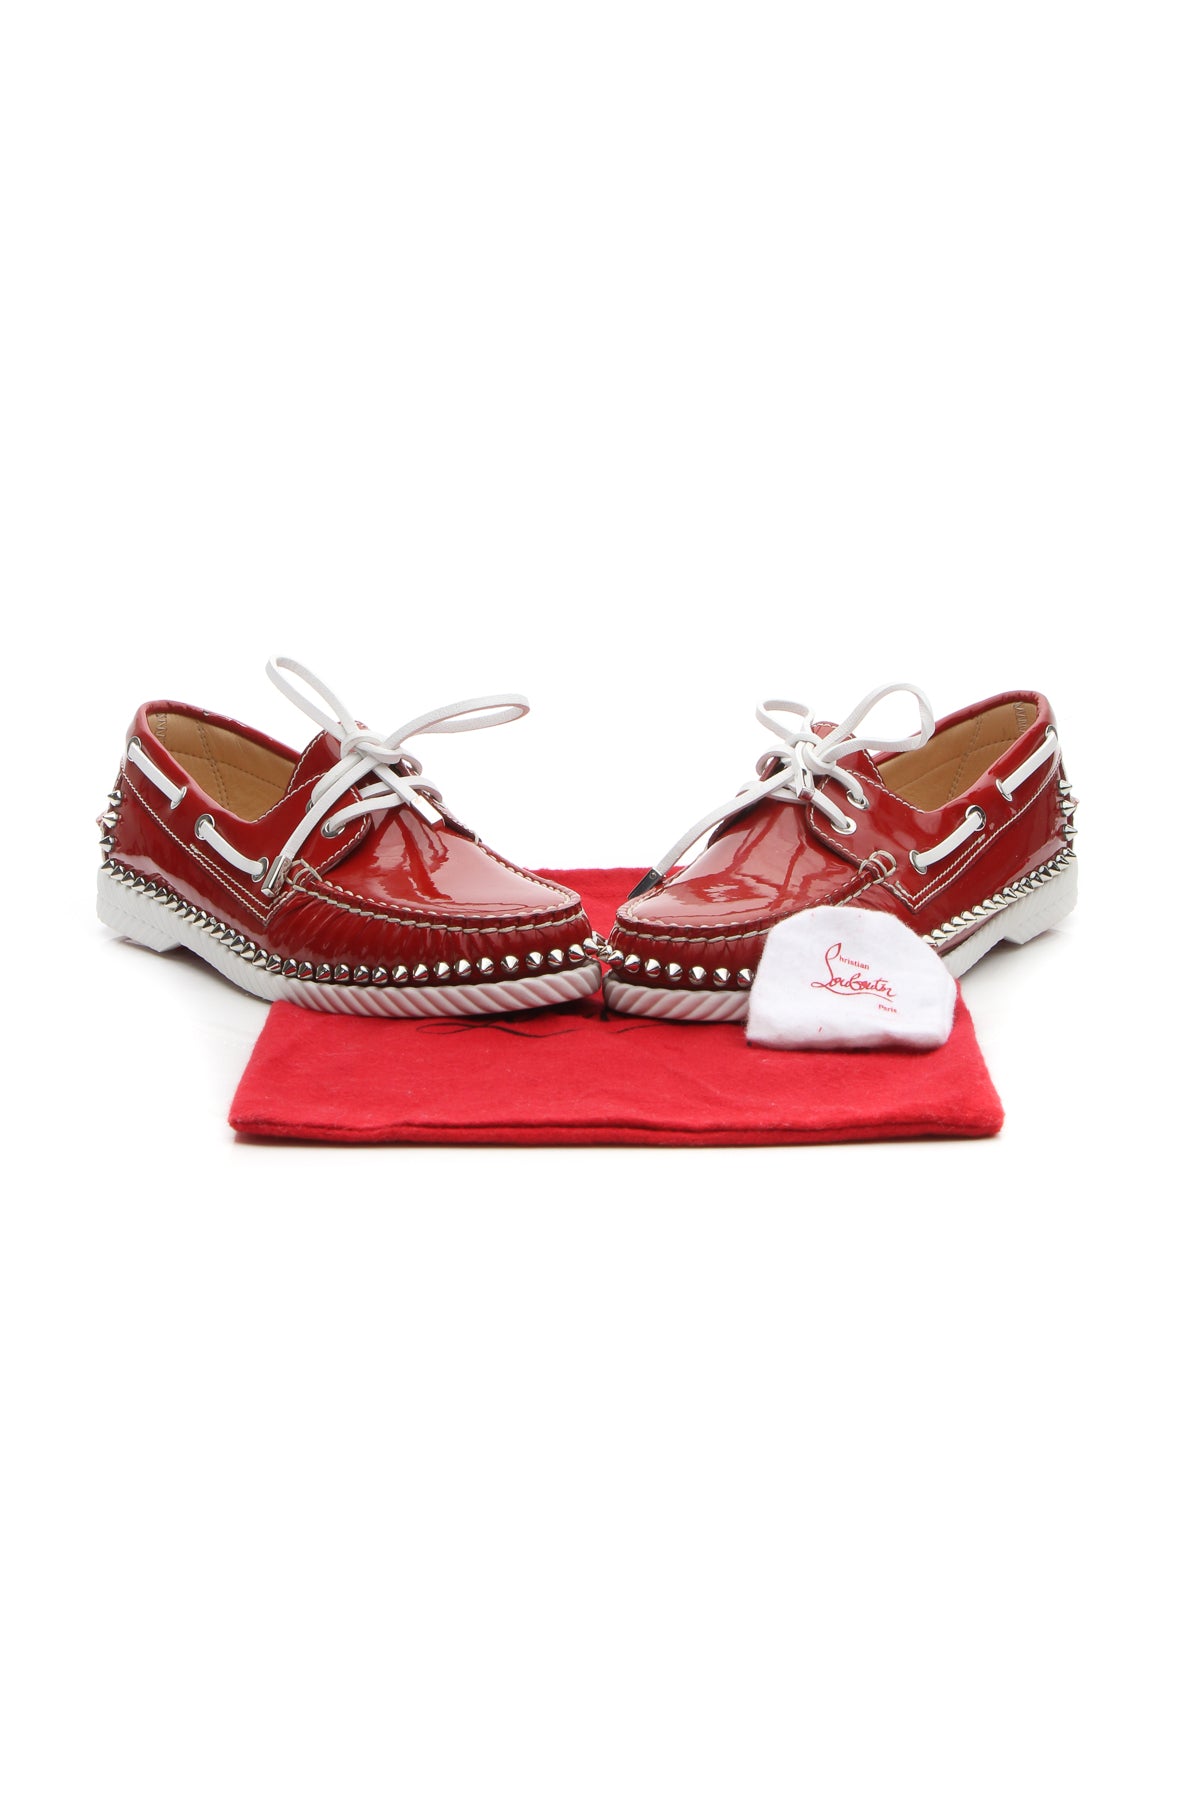 Steckel Spike Flats - Red Size 39